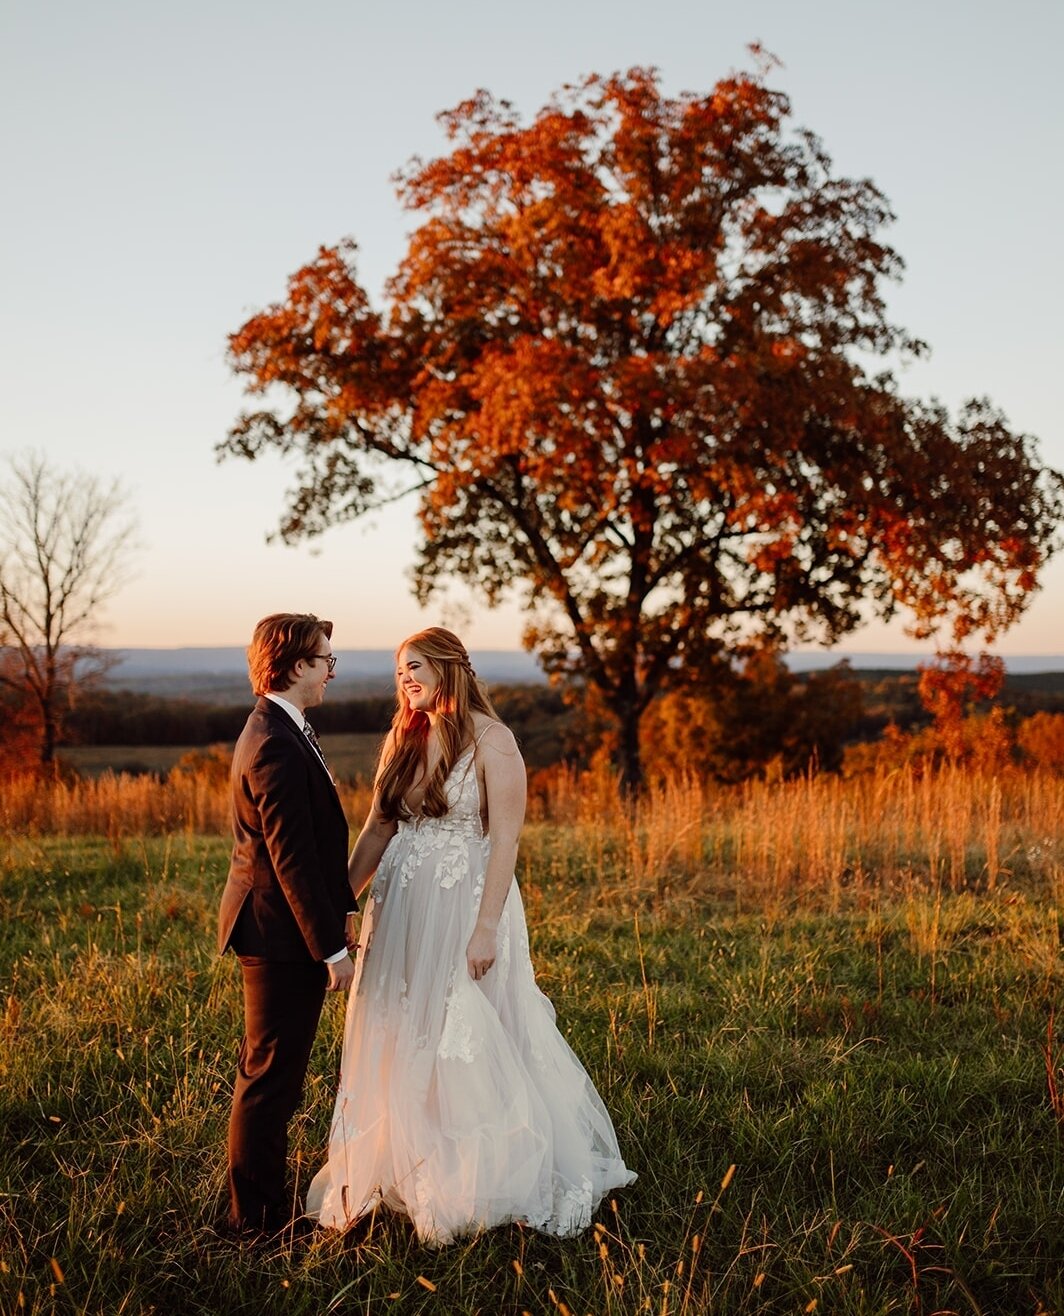 November weddings. You truly never know what type of weather you're going to get in Tennessee, but Rob and Brennan had the perfect day for their one-year anniversary celebration. They had a small elopement in 2020, and gathered with all of their fami